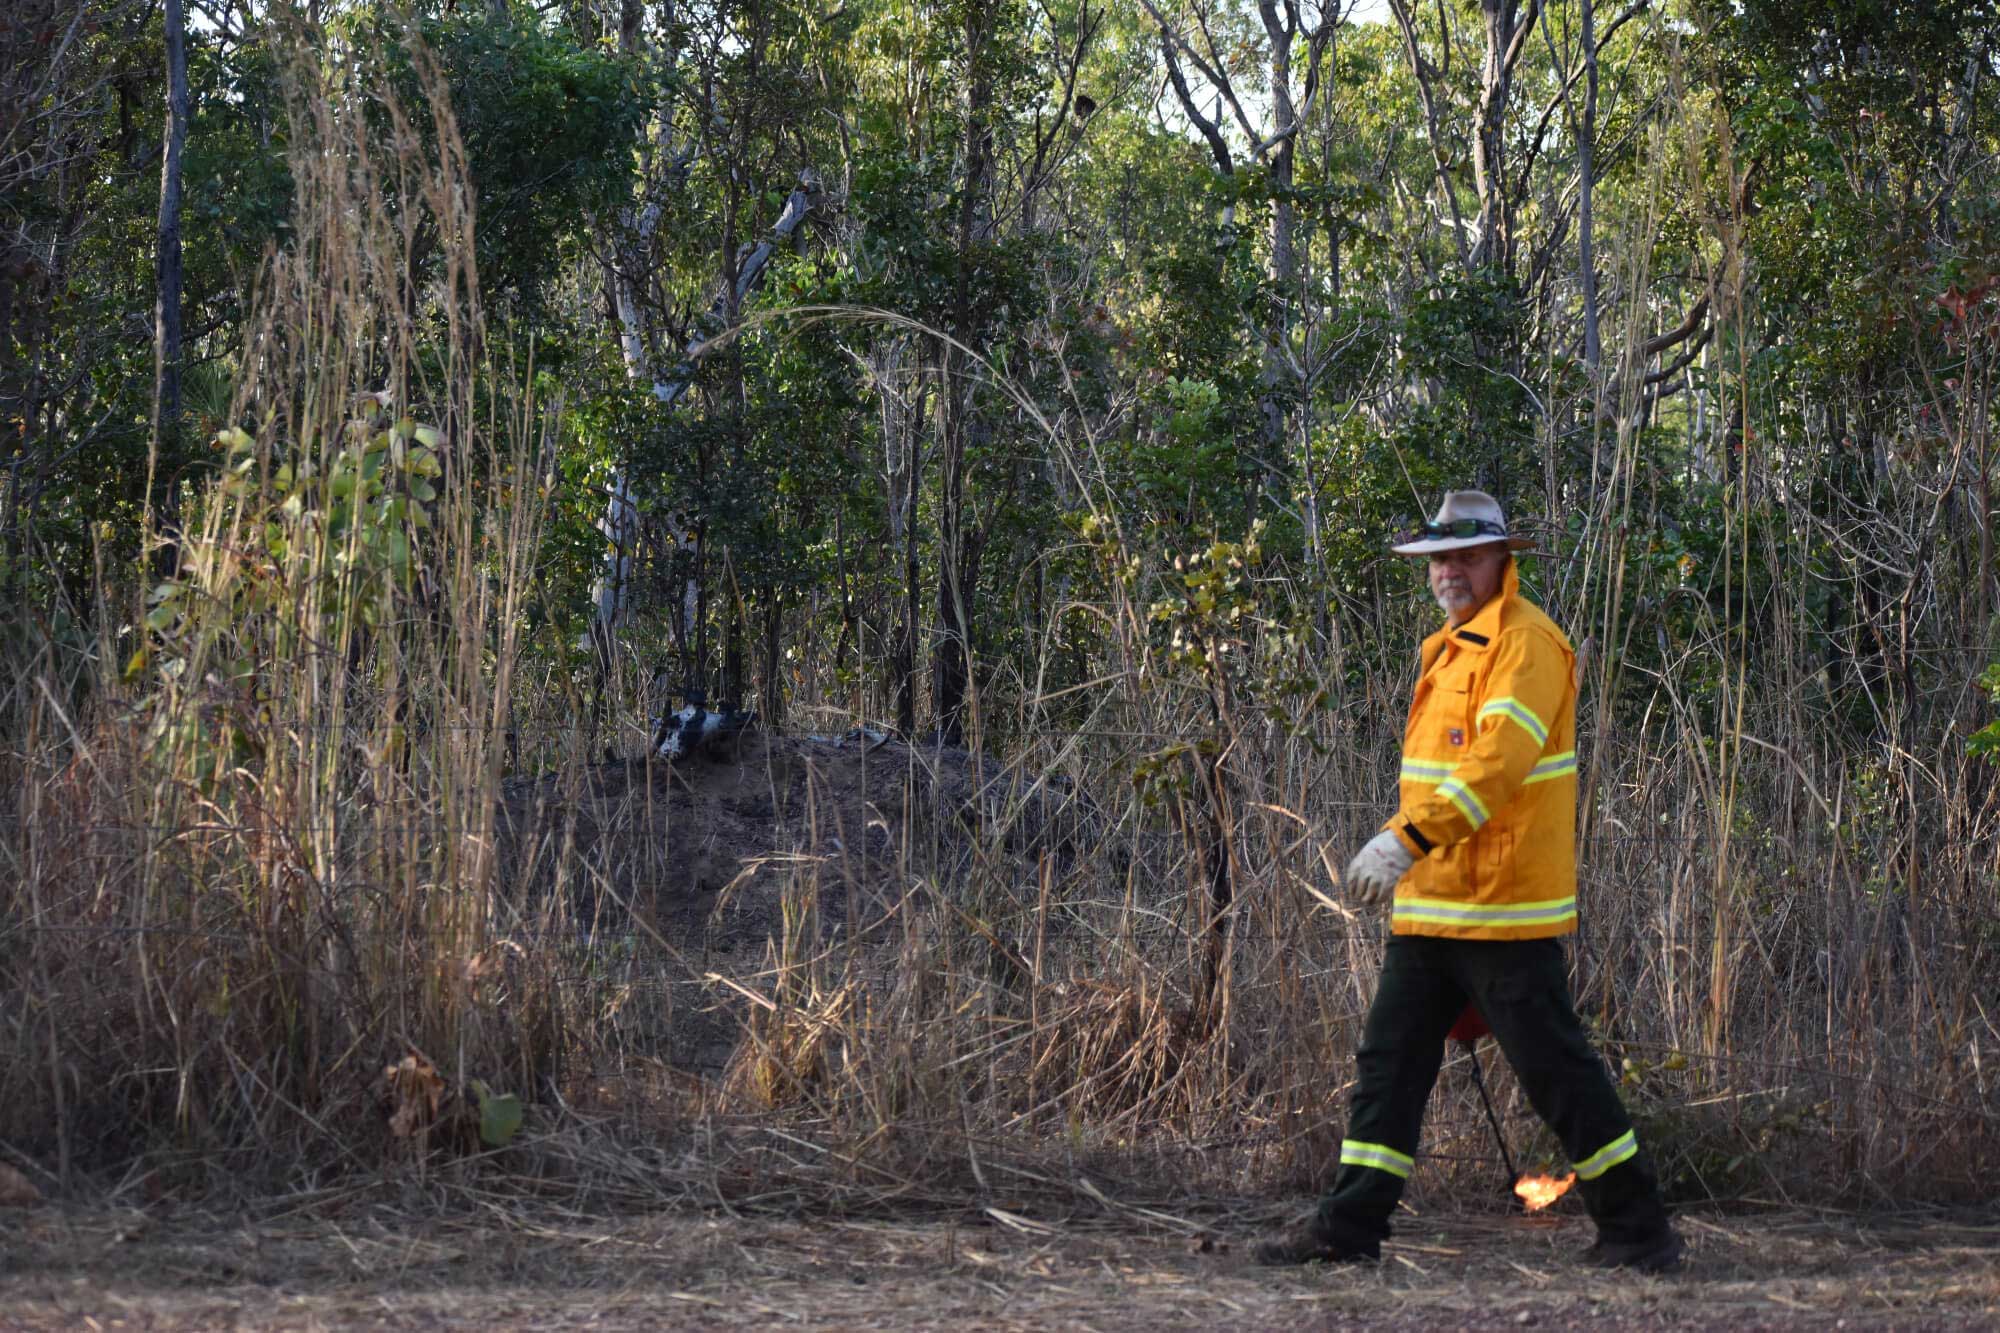 Firefighter walking in front of dry bushes